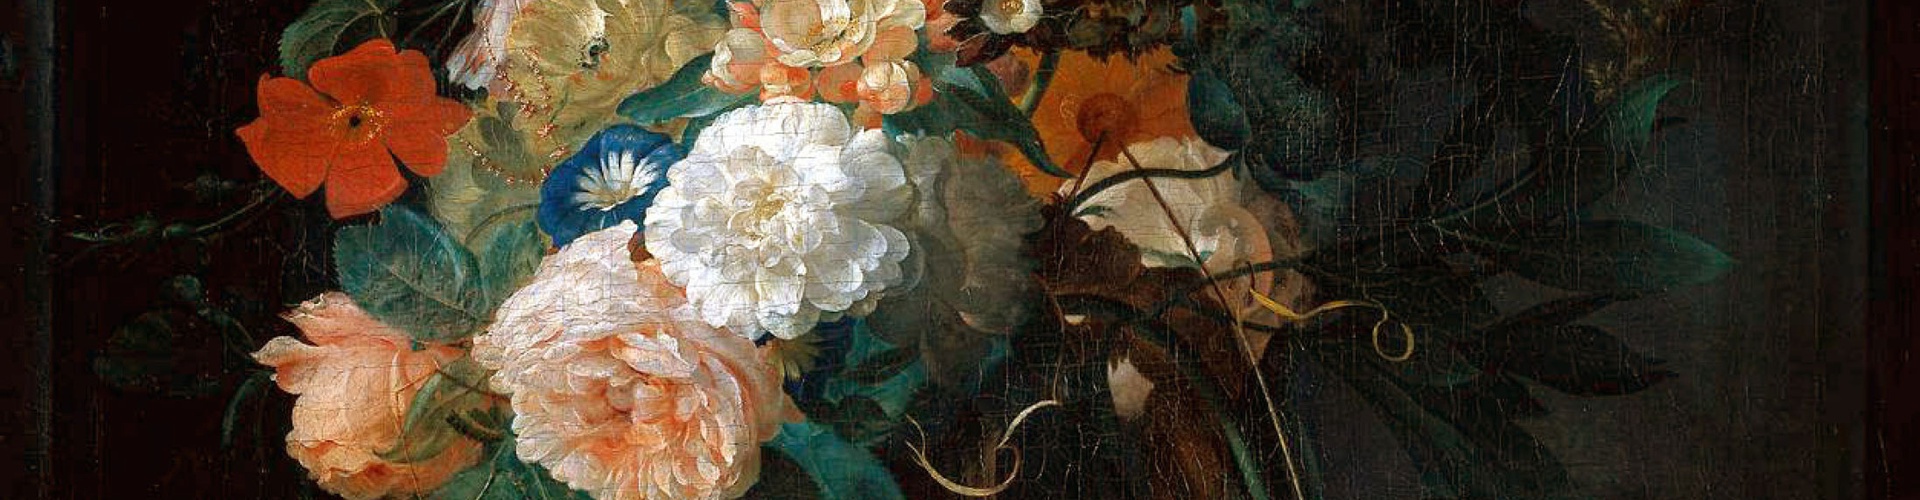 Gallery of the best paintings in the history of art in the world, flowers, part one